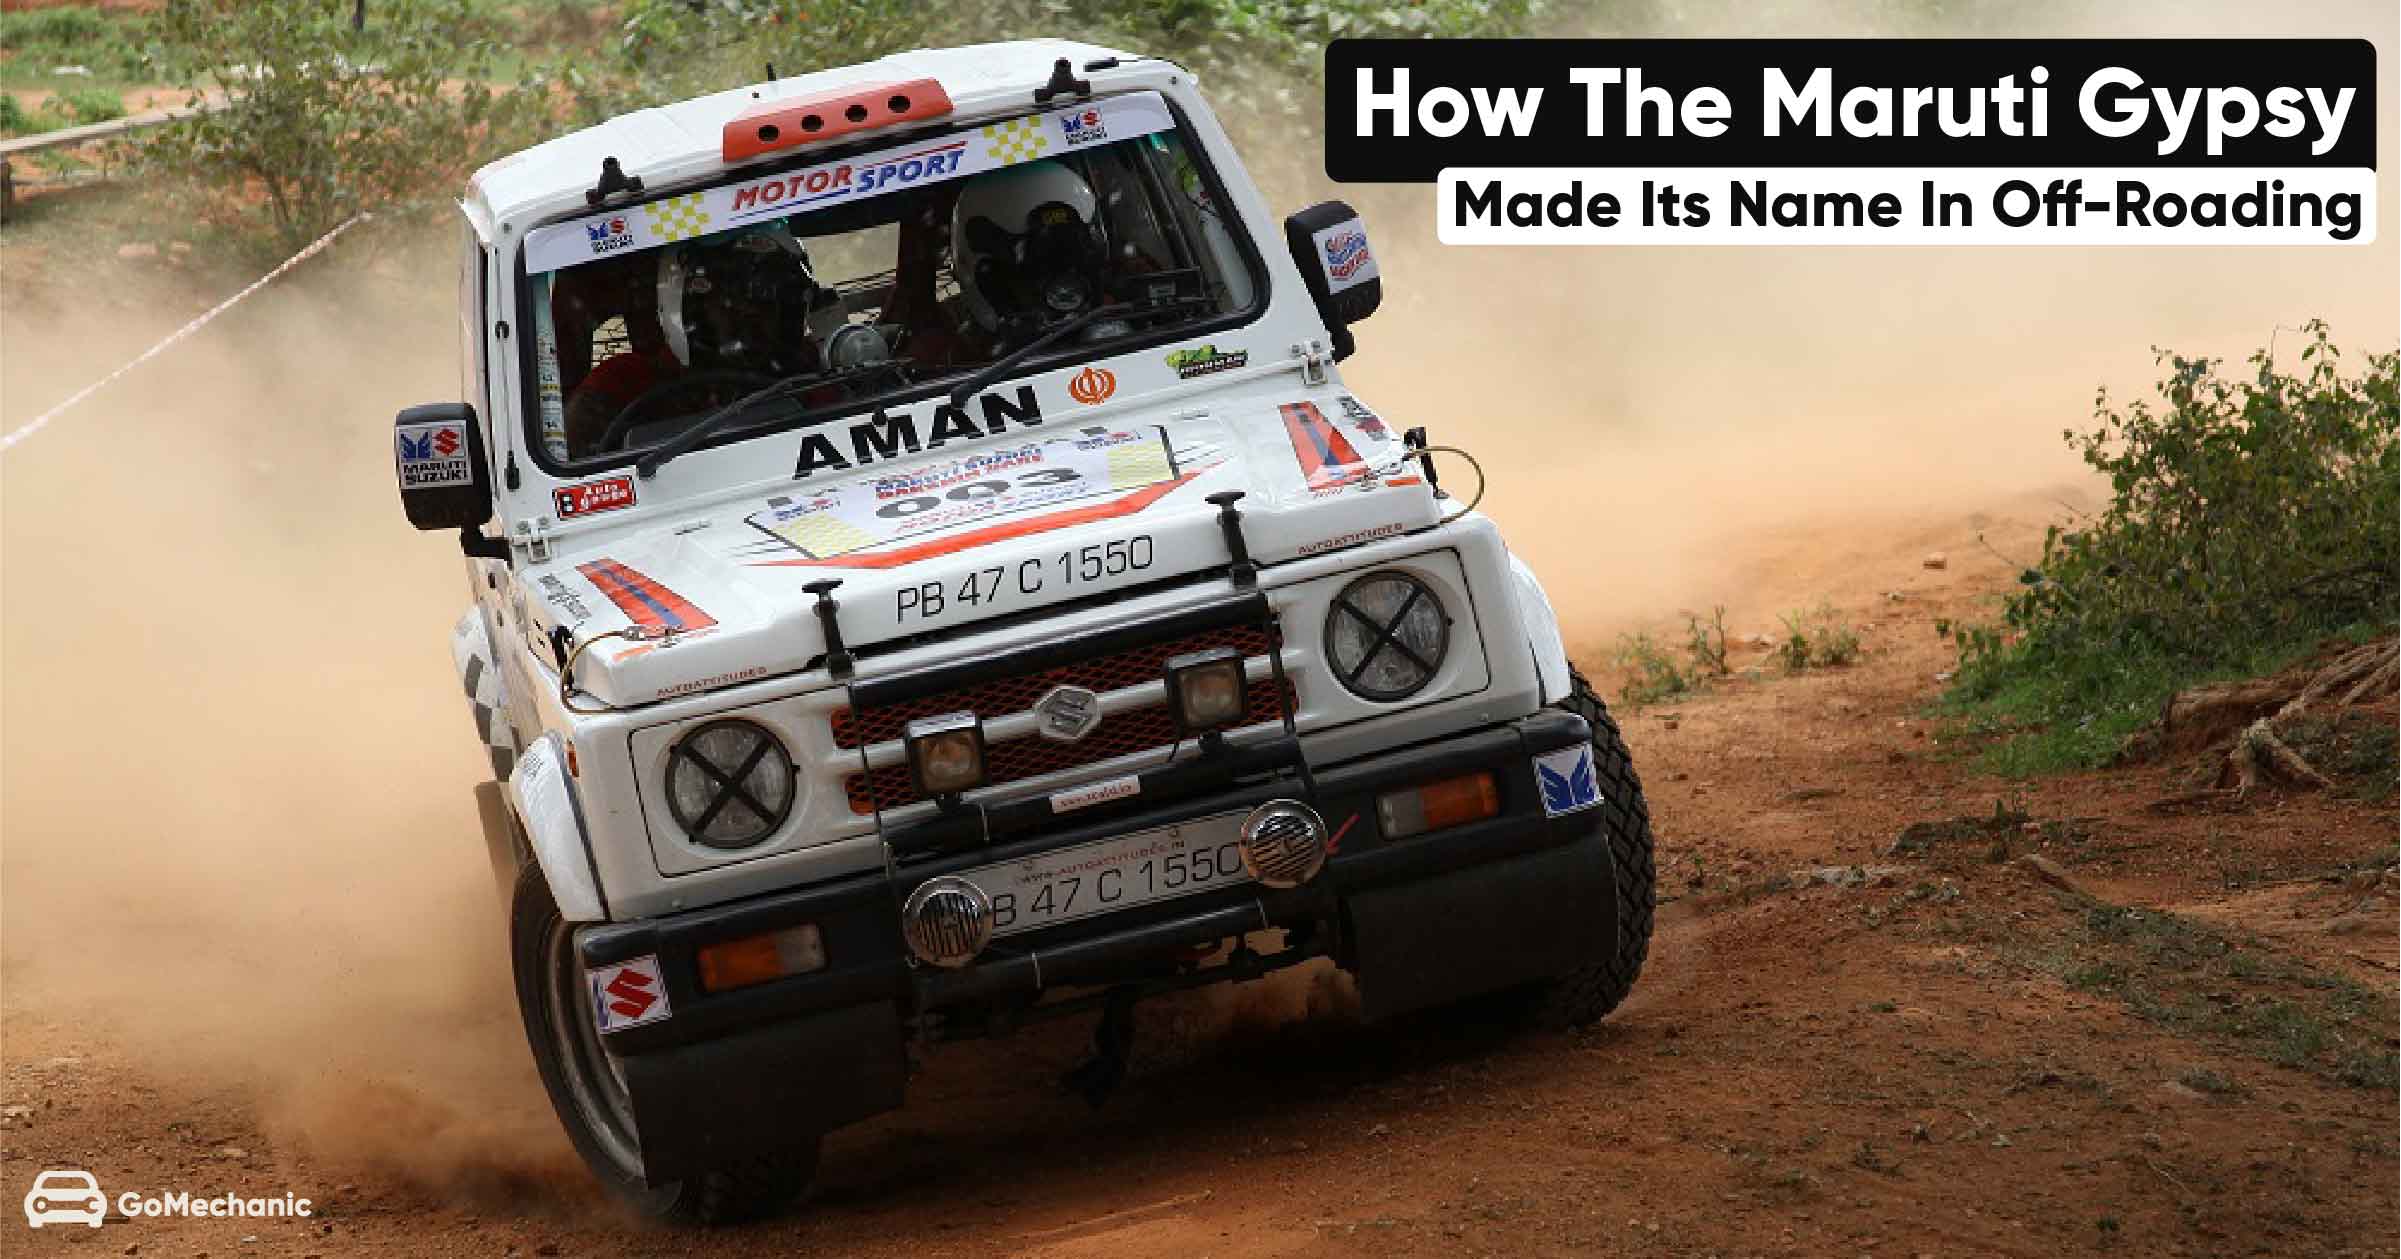 How the Maruti Gypsy made its name in off-roading